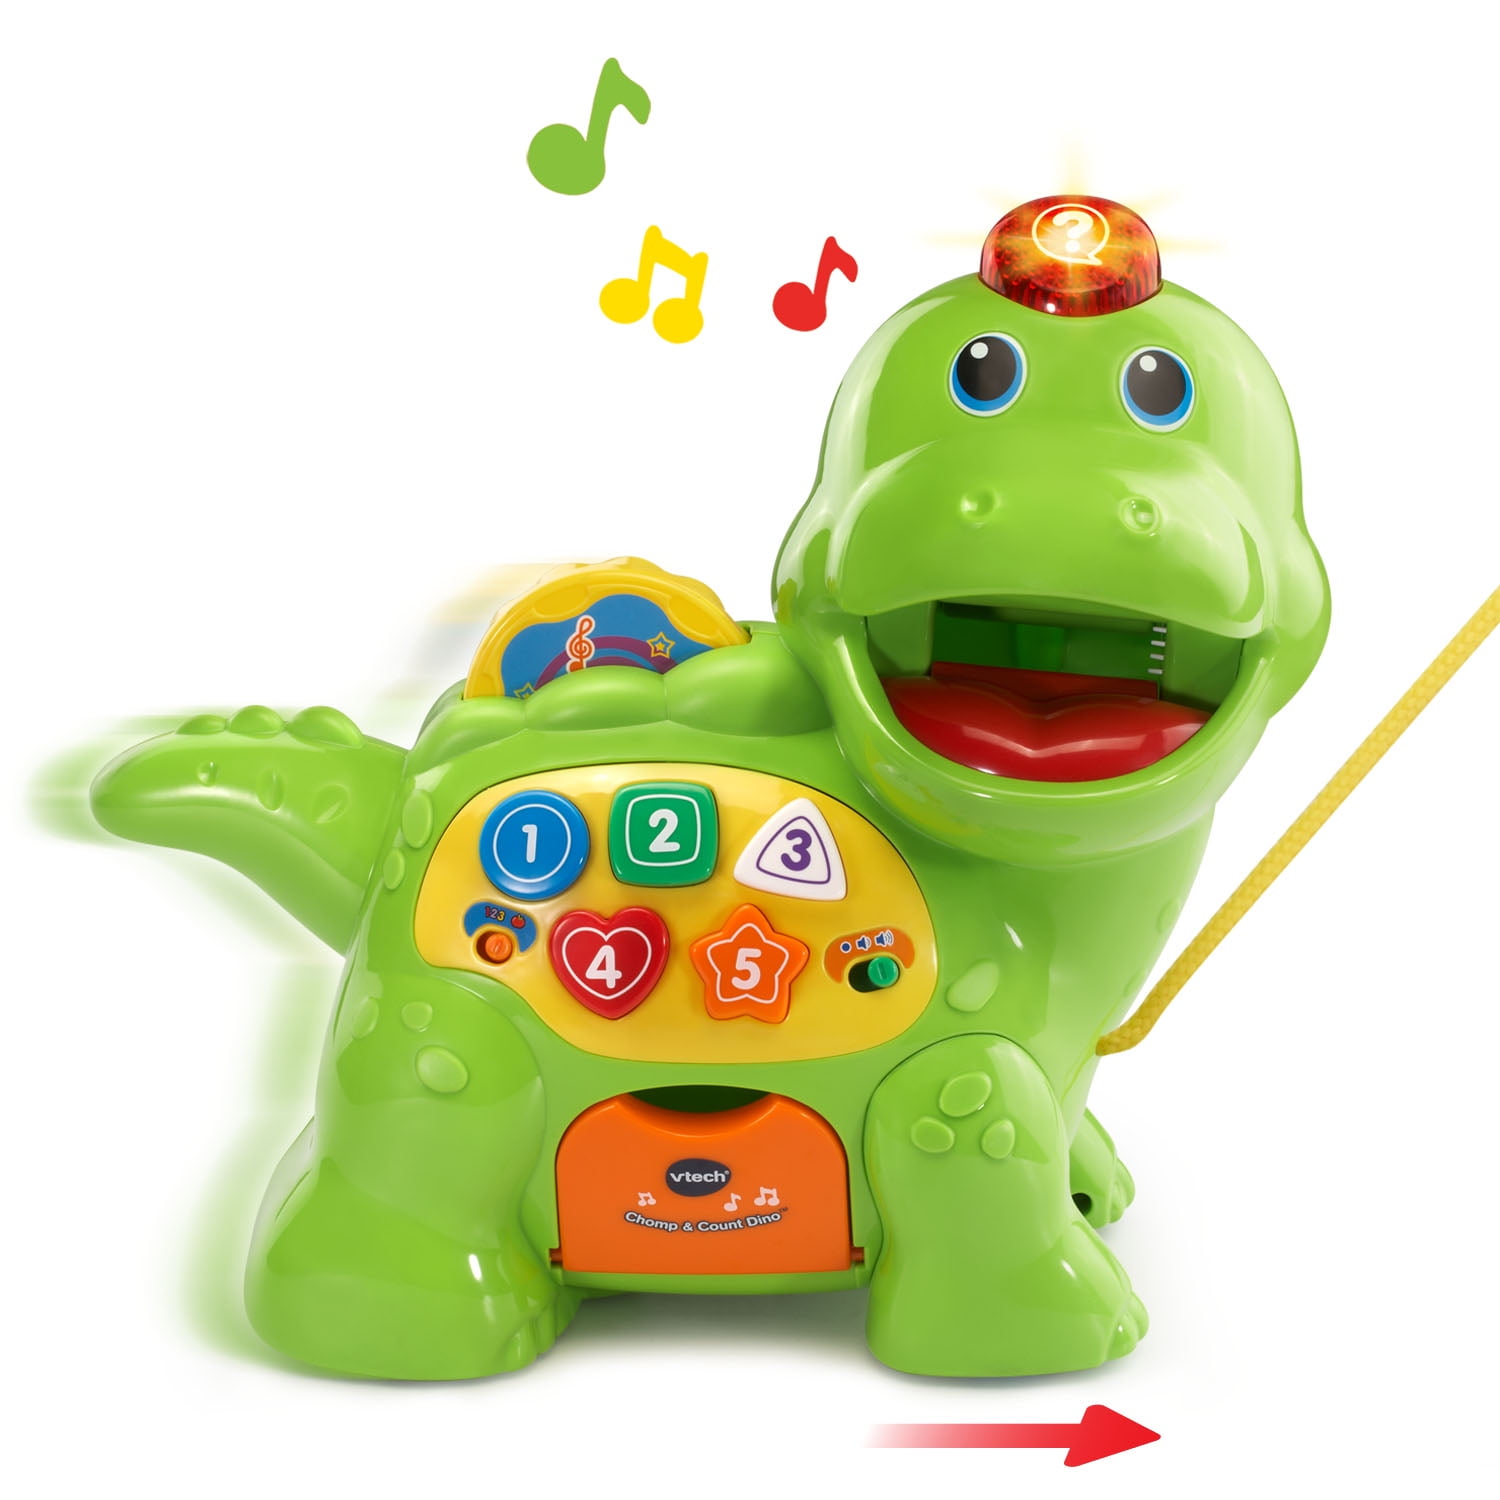 vtech chomp and count dino